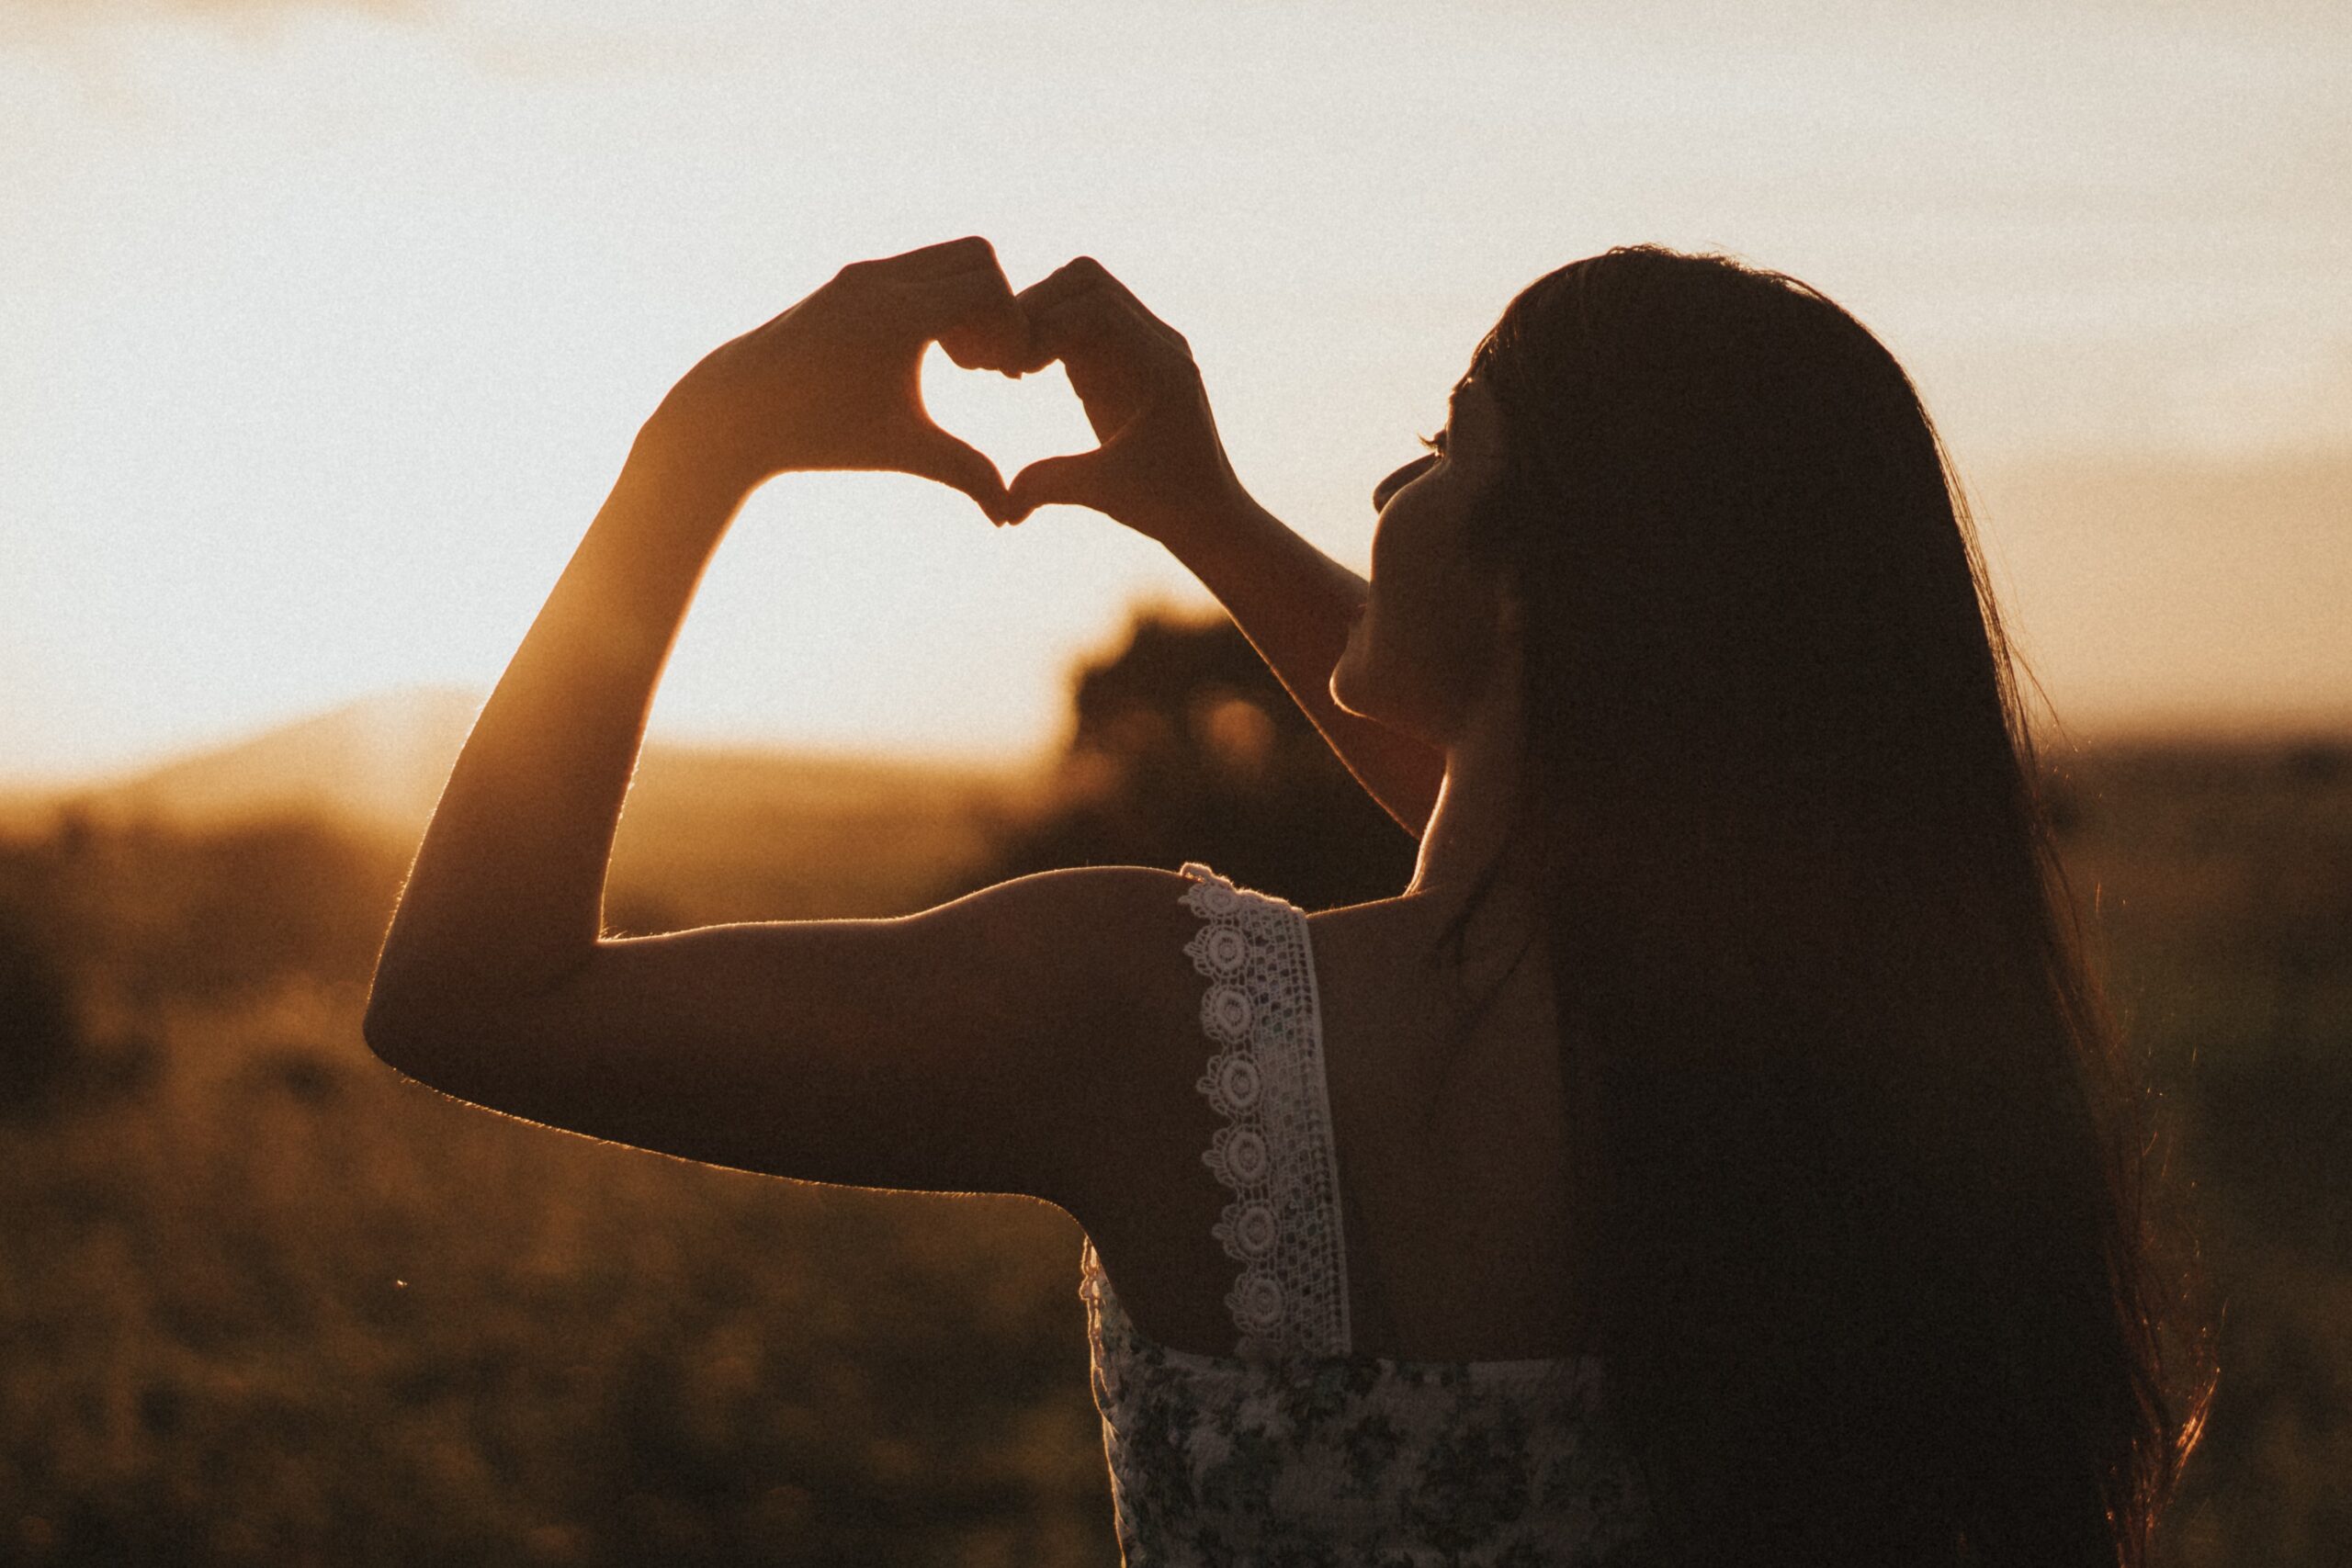 Woman standing in the setting sun forming a heart with her hands